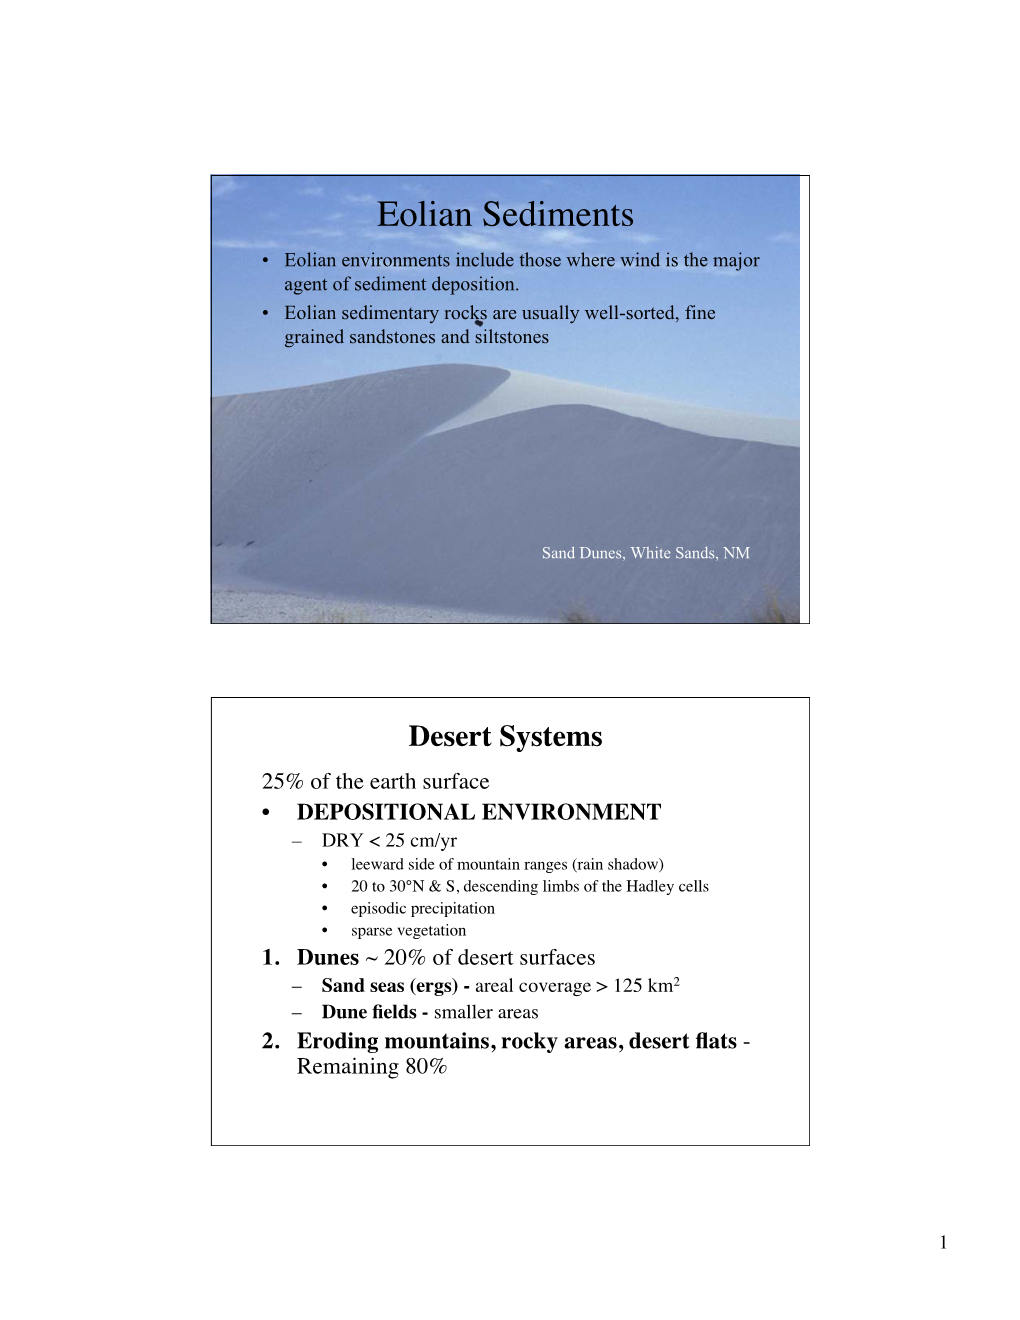 Eolian Sediments • Eolian Environments Include Those Where Wind Is the Major Agent of Sediment Deposition